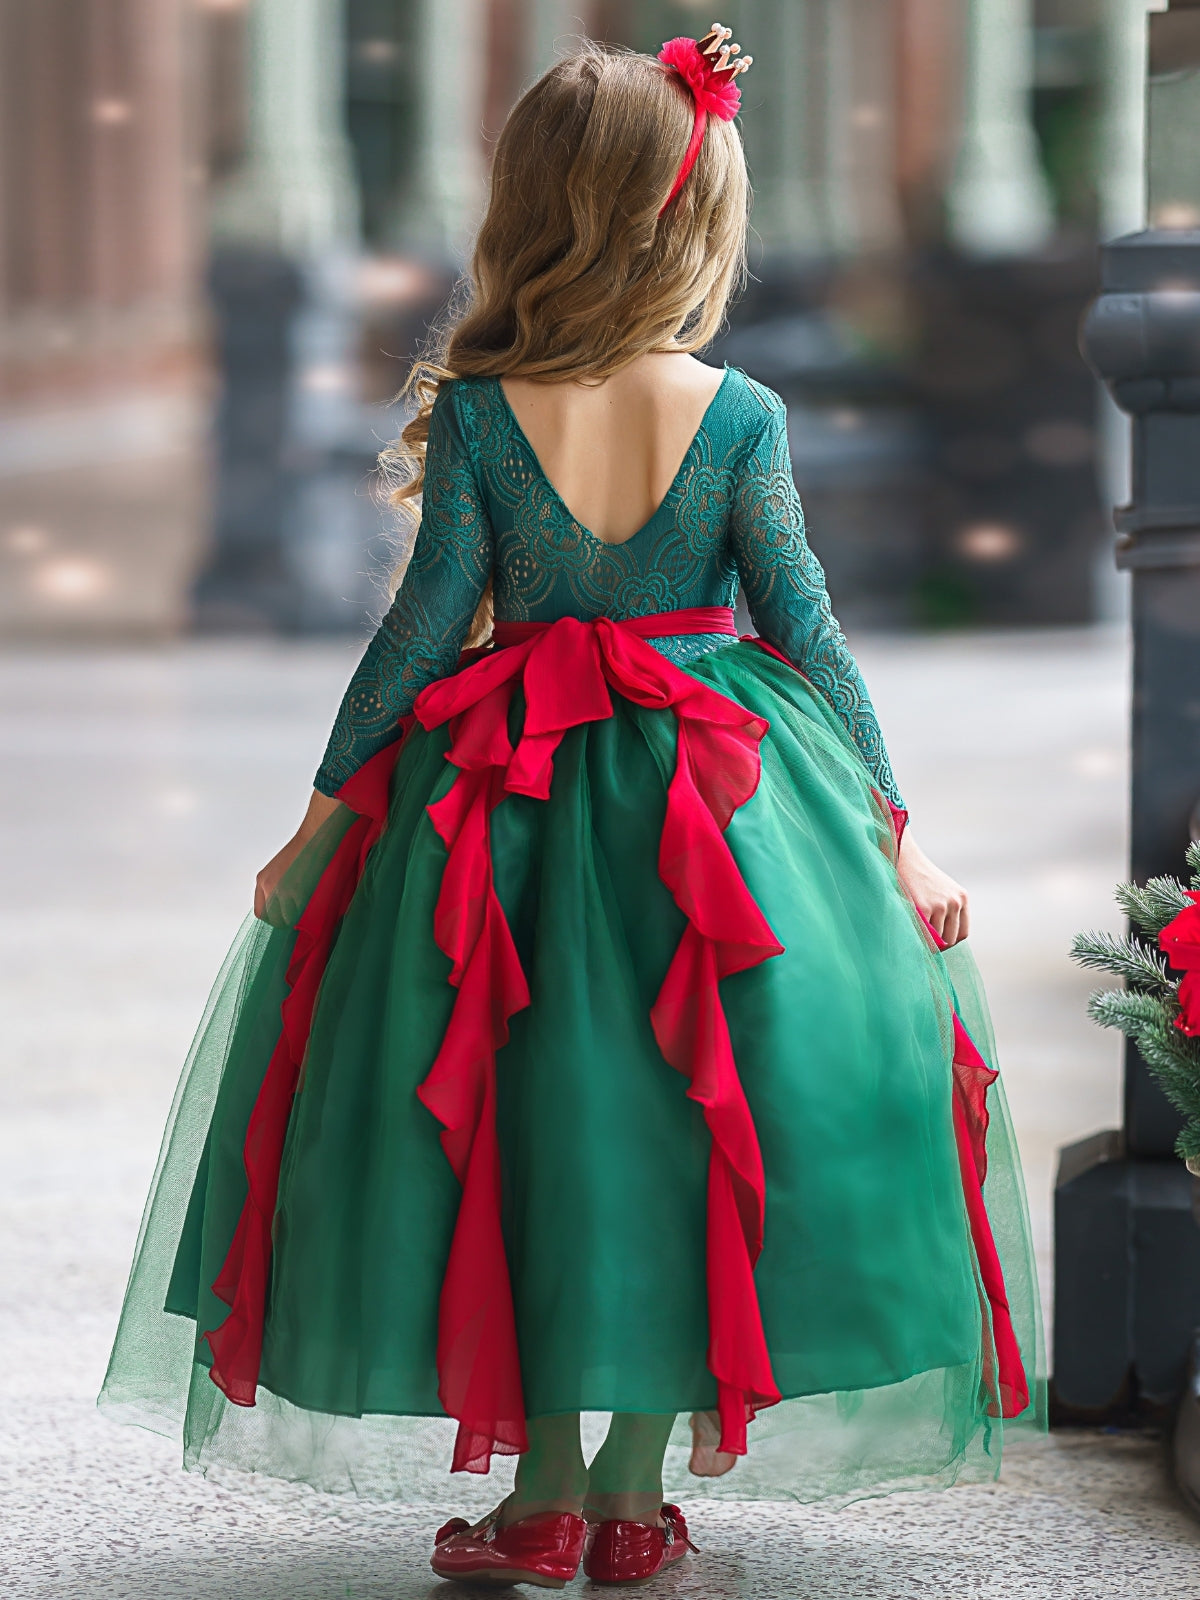 Girls Winter Formal Wear | Long Lace Sleeve Princess Holiday Gown